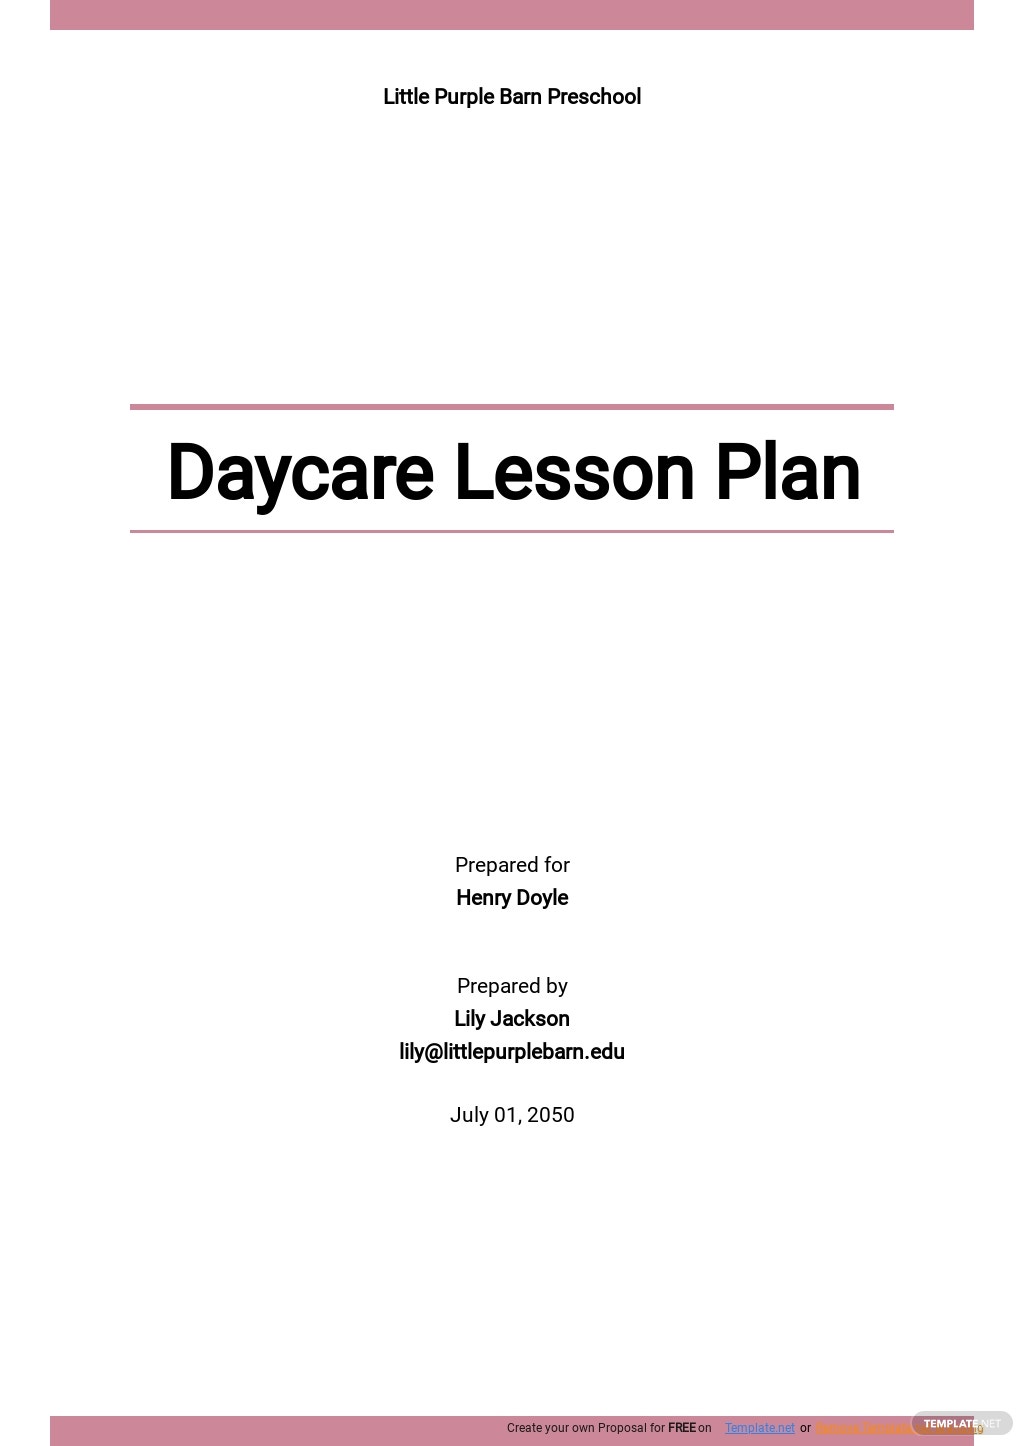 daycare lesson plan template